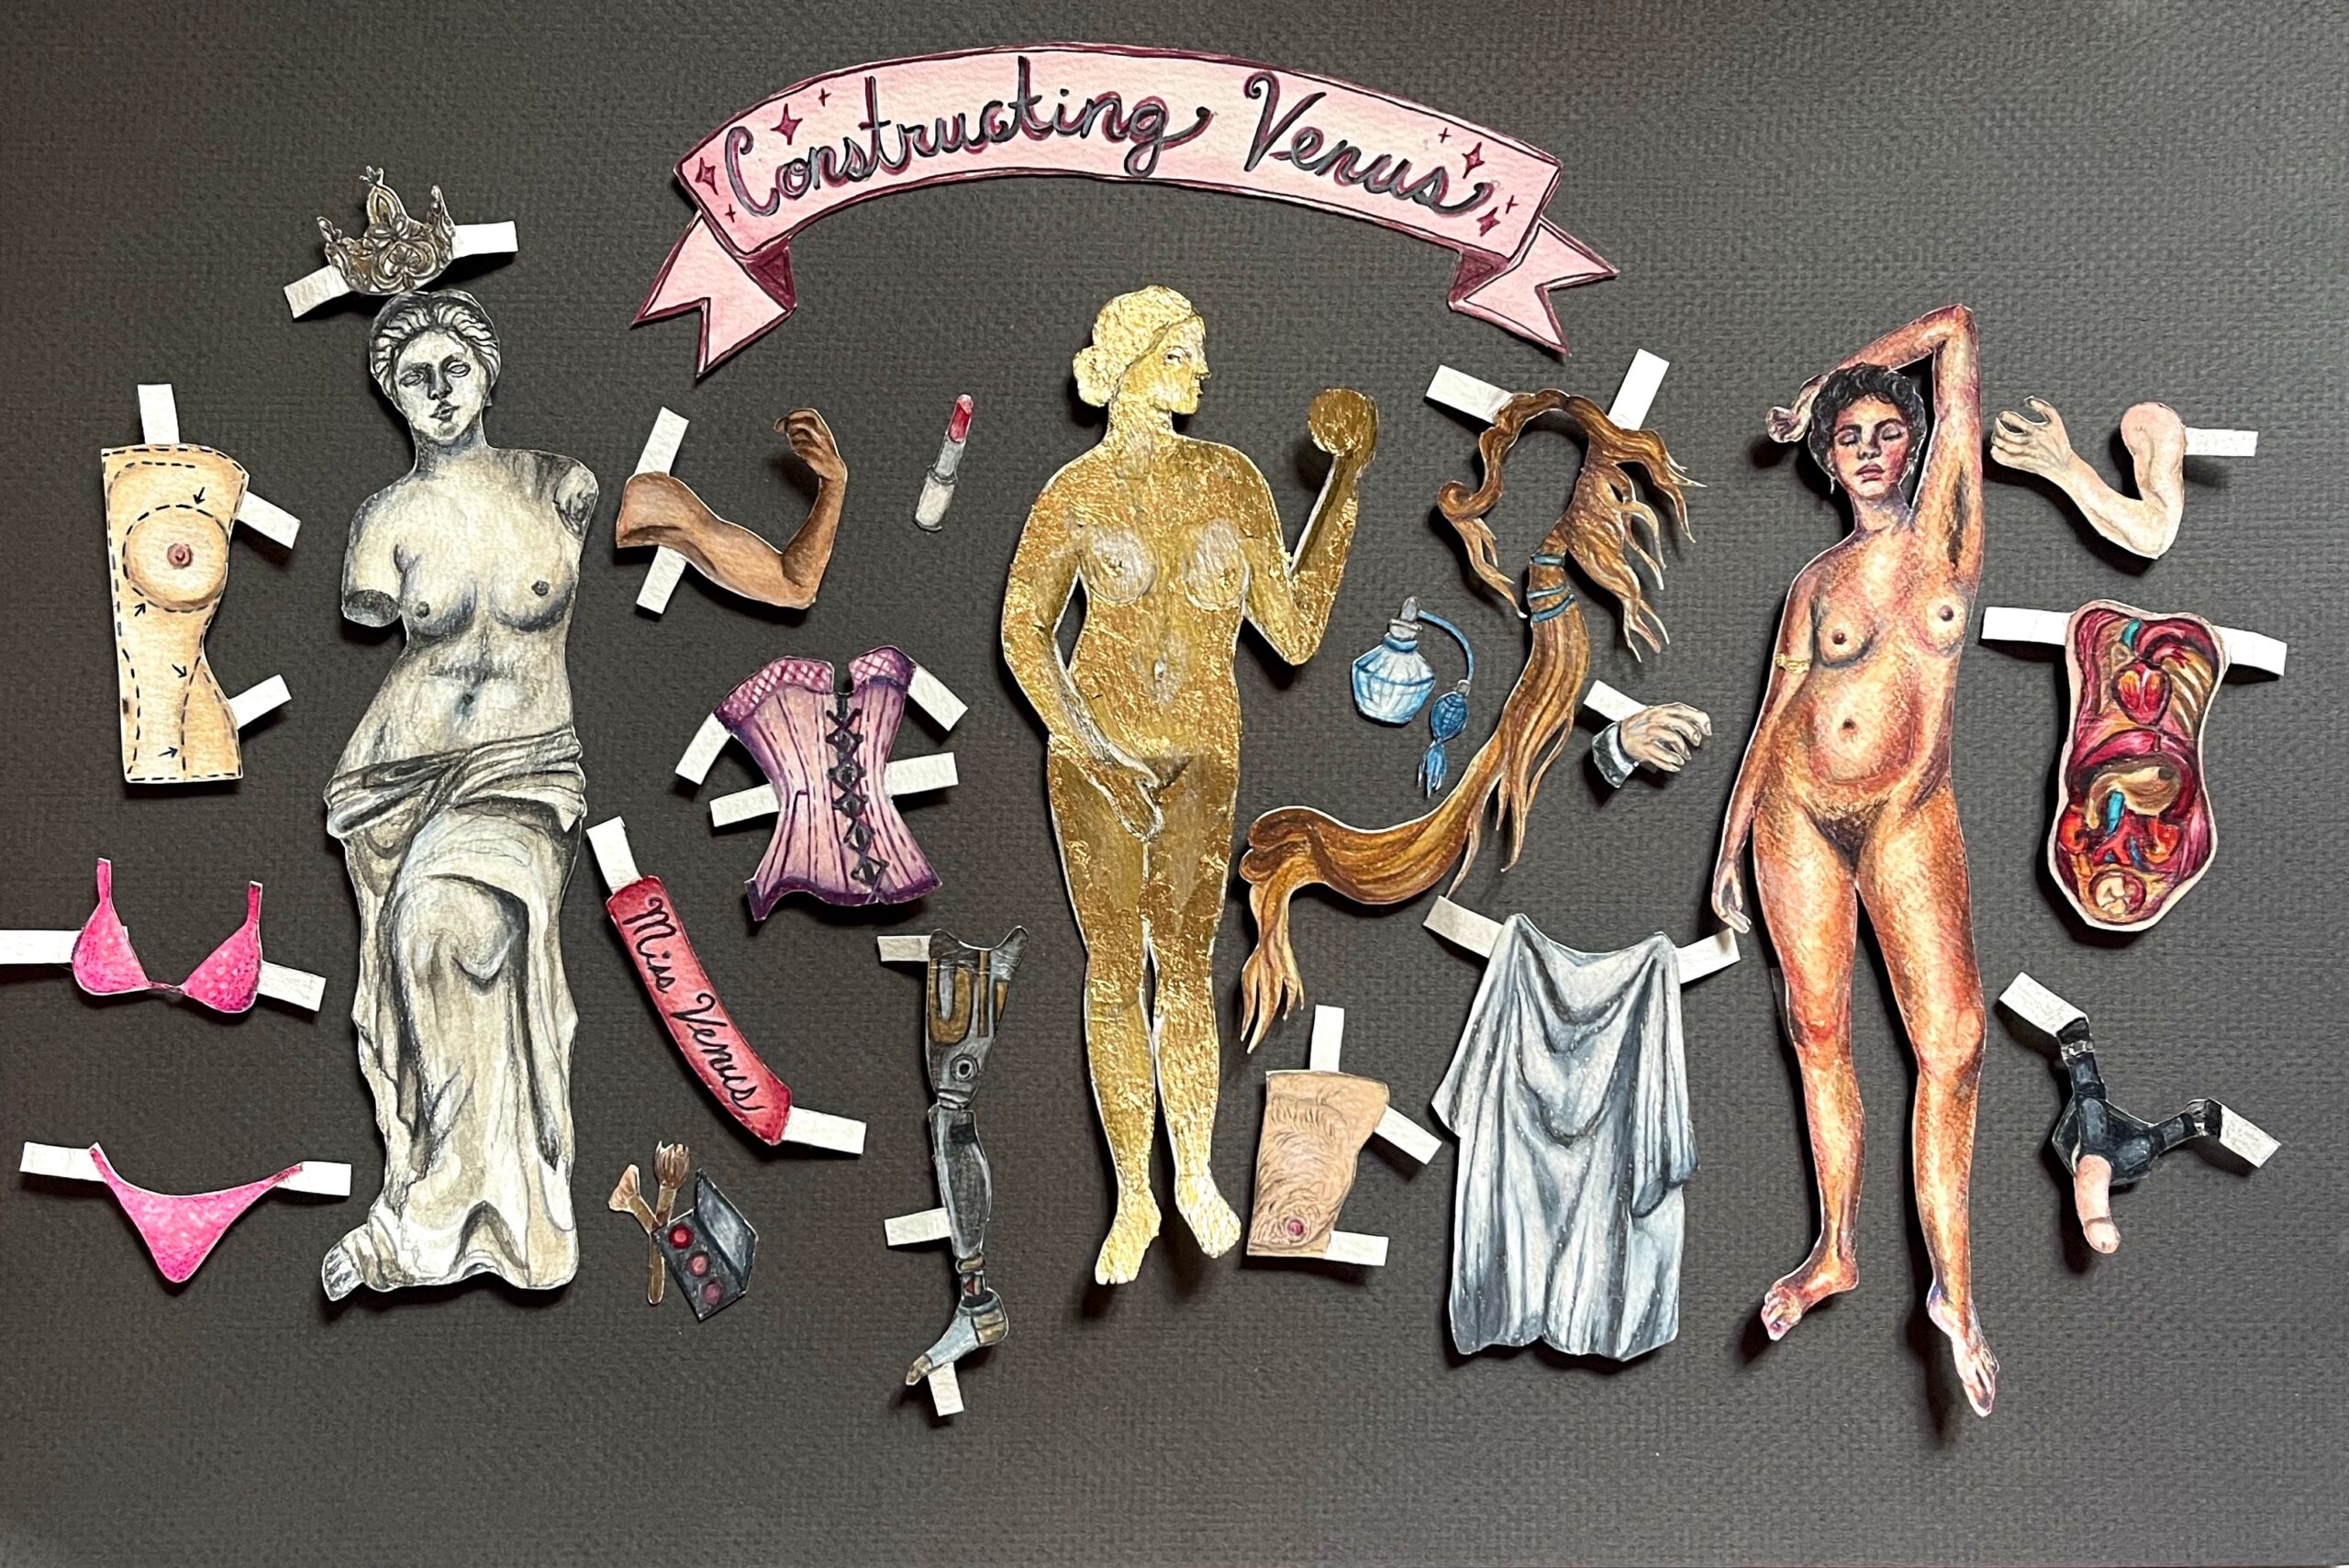 Image of art work depicting three main figures, each of which represent a version of Venus or Aphrodite. The black and white figure on the left resembles the Venus de Milo. The middle figure is abstract in its visual presentation, the details of the body obscured by the application of gold leaf. The figure on the right shows a woman standing in a posed position and rendered in full color. Around these figures an array of objects and different body parts have been placed each accompanied by a set of foldable paper tabs. Above all this imagery, sits a banner that reads “Constructing Venus” indicating that the viewer is meant to construct their own version of Venus by removing the different items and placing them onto the figures.